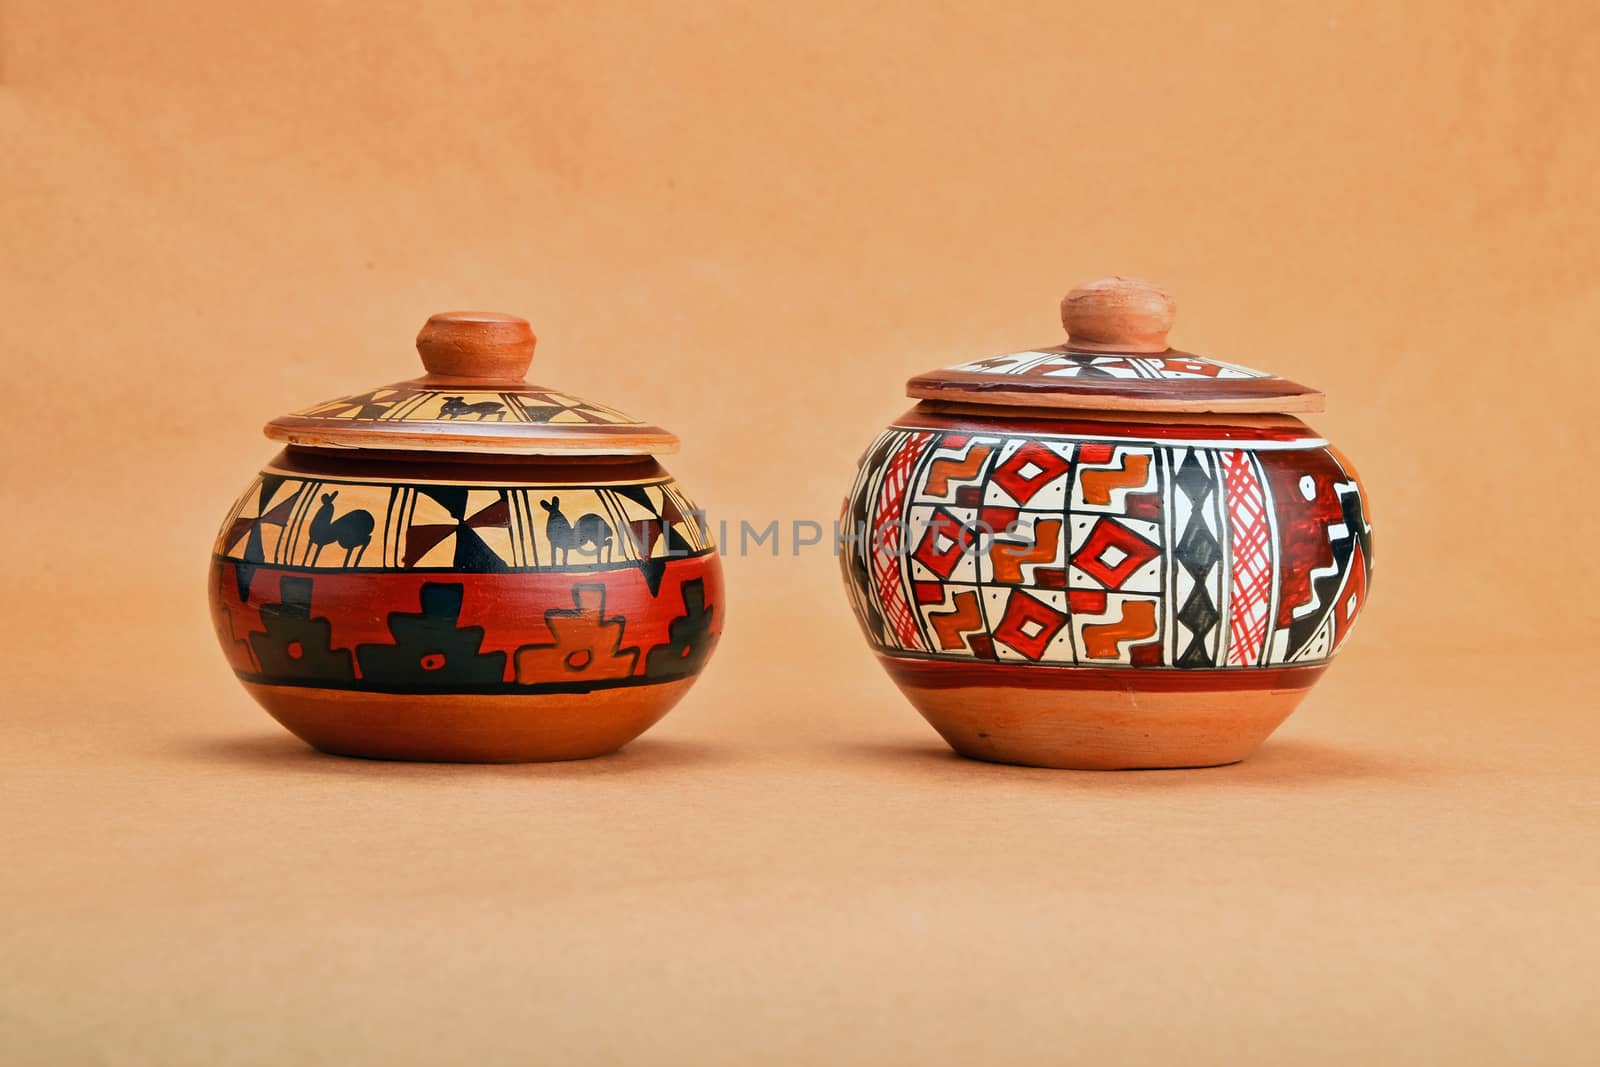 Two painted handmade traditional Latin American ceramic pot with closed lid on kraft paper background